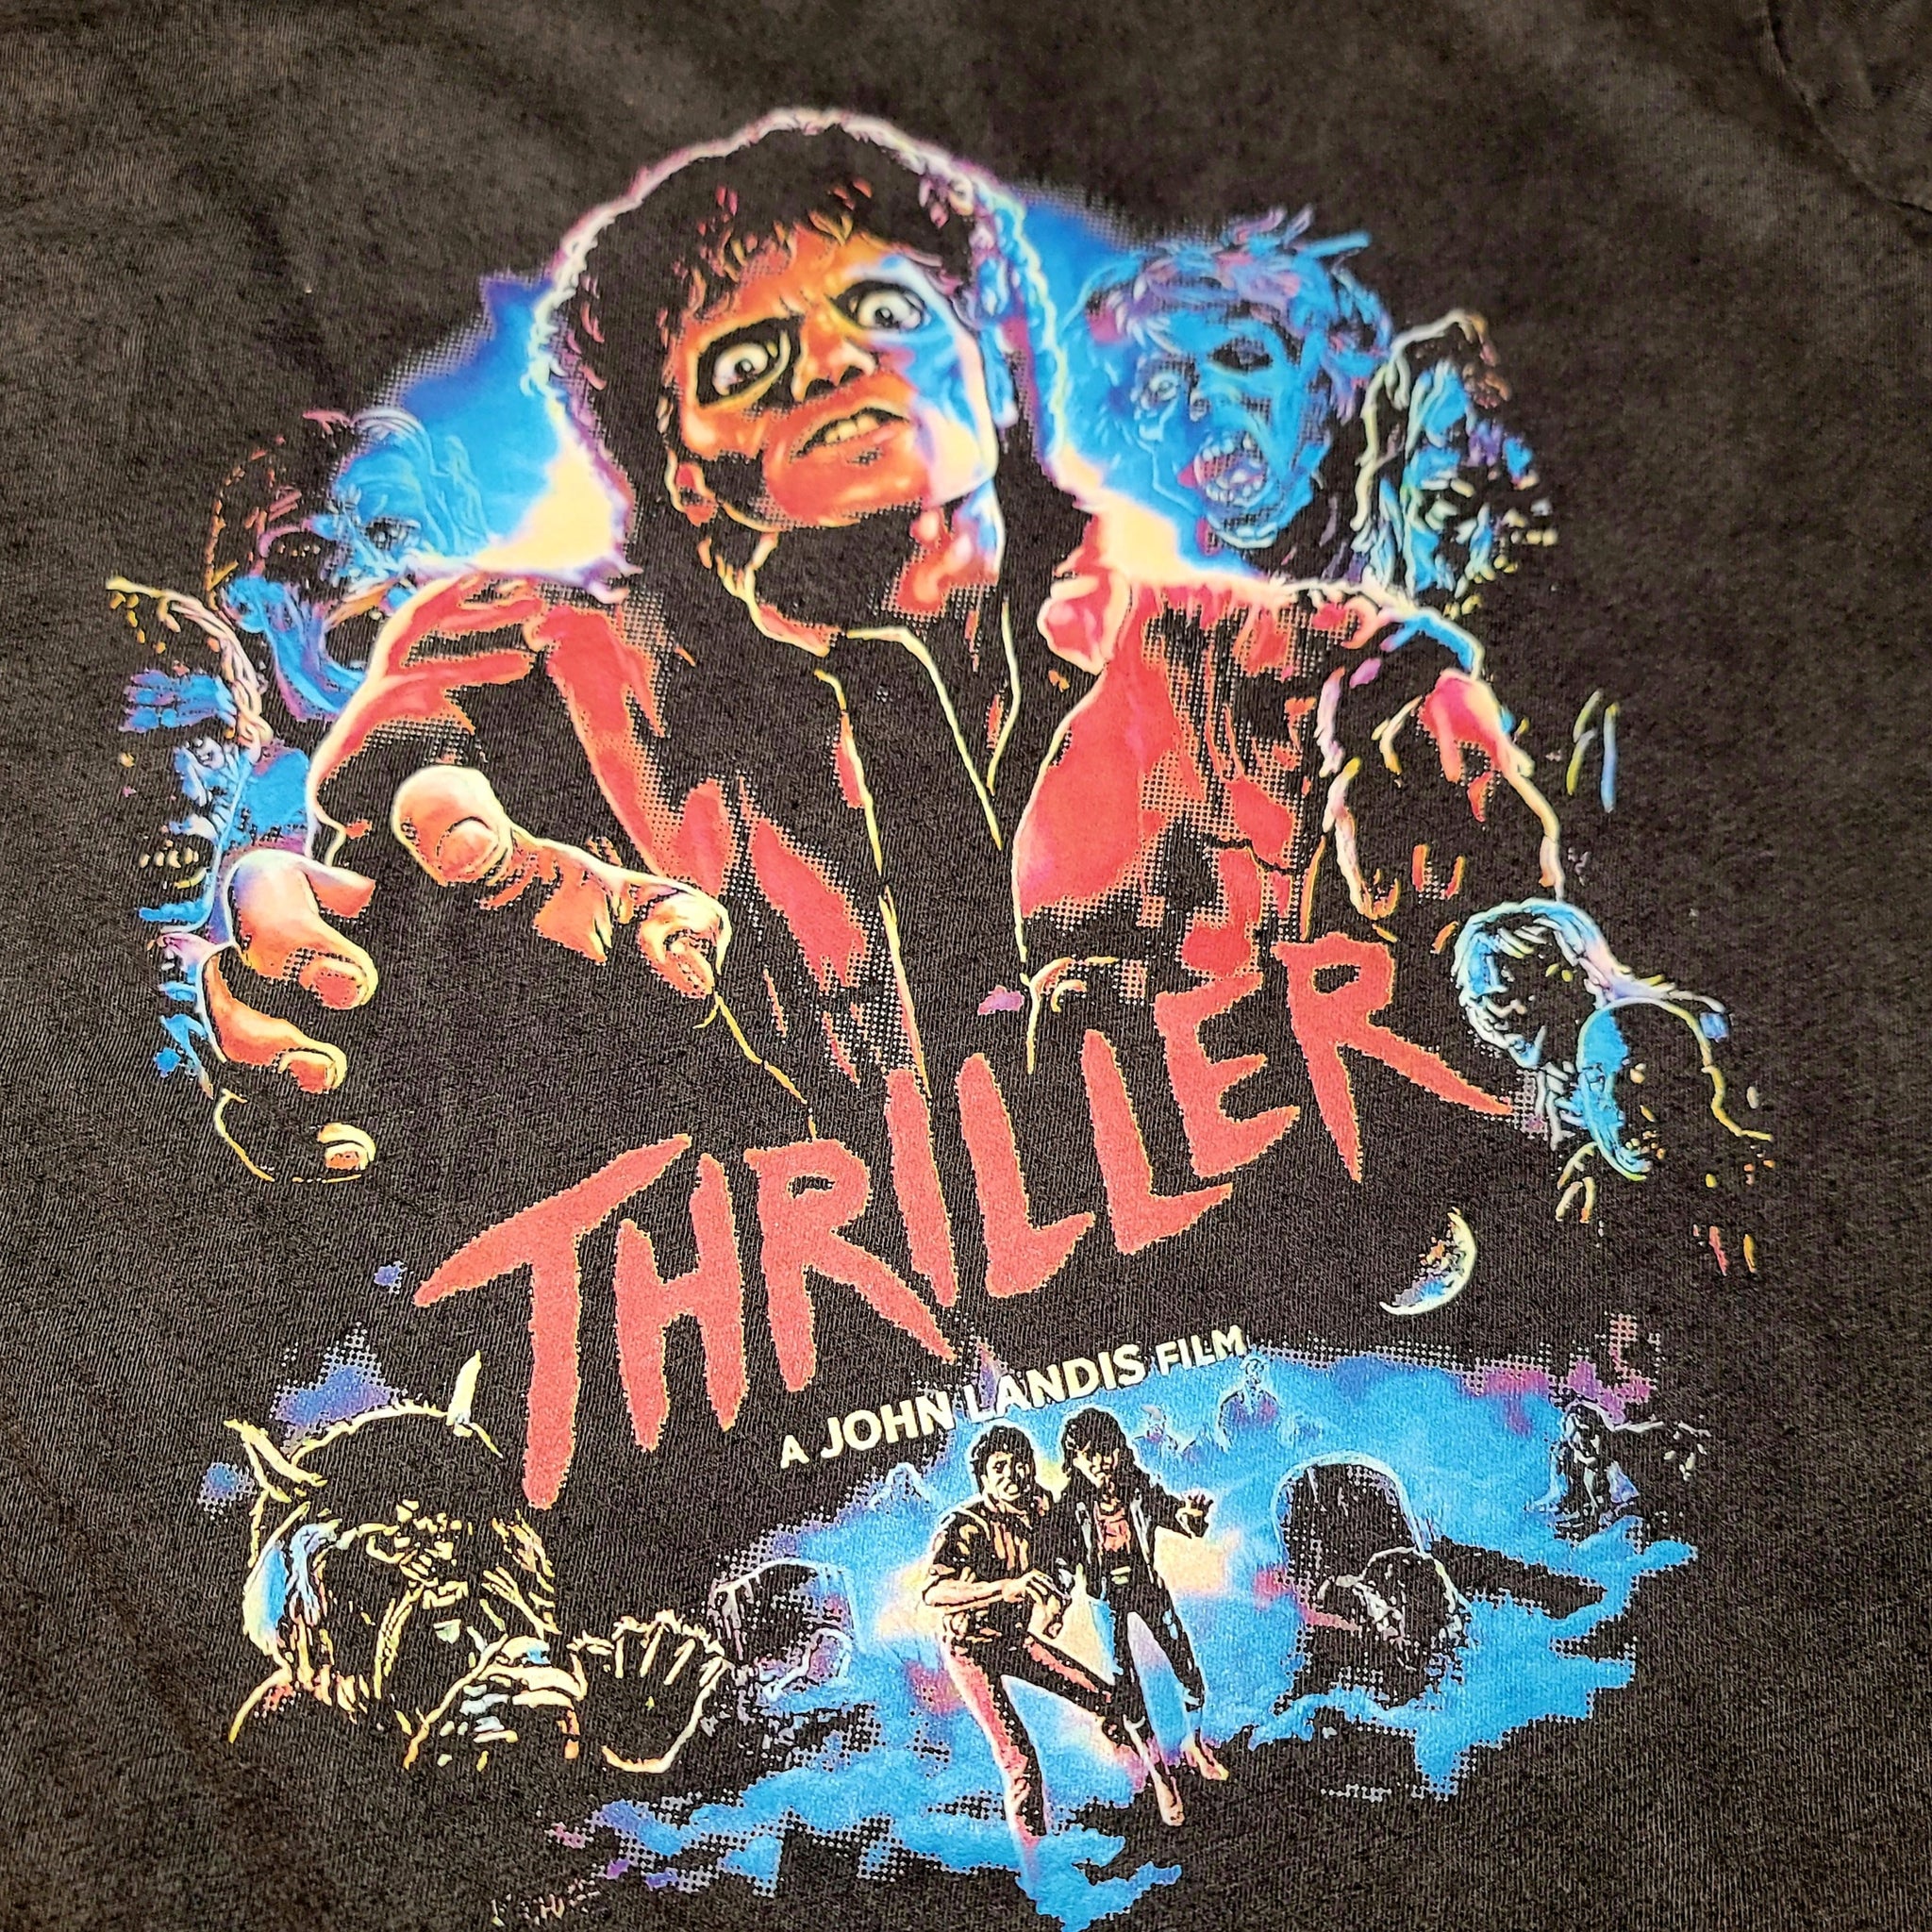 Michael Jackson T-Shirt, Vintage 90s Graphic Black T-shirt, Thriller  Tribute Tee Unique Gift For Fans Designed & Sold By Chita S